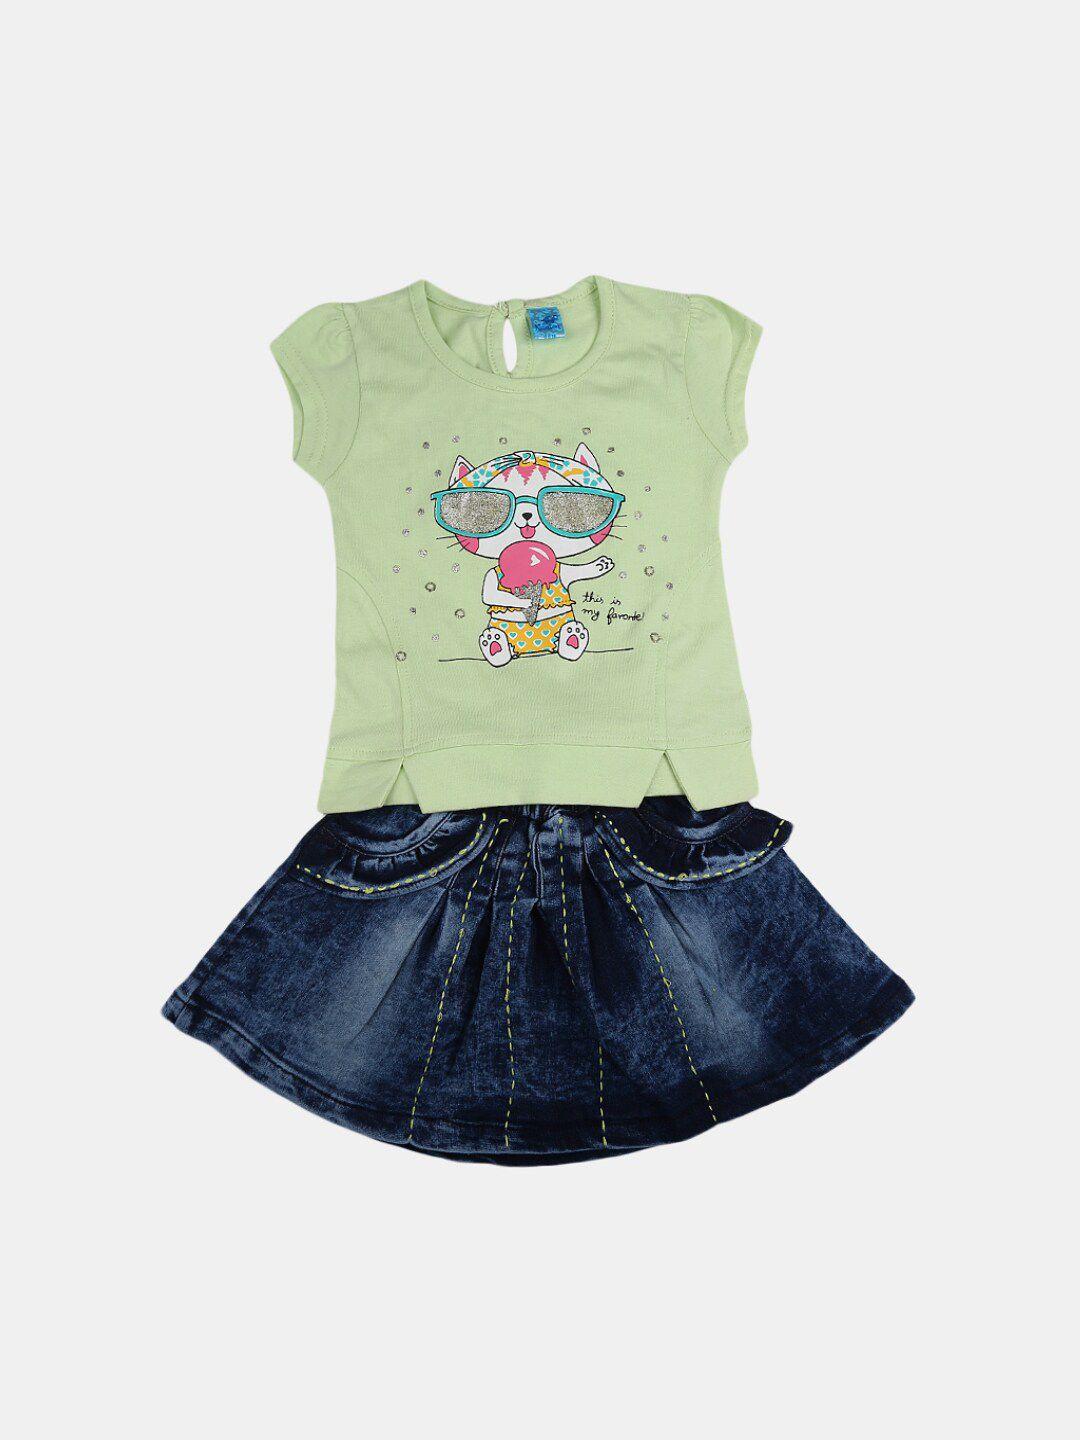 v-mart infants graphic printed round neck pure cotton t-shirt with skirt